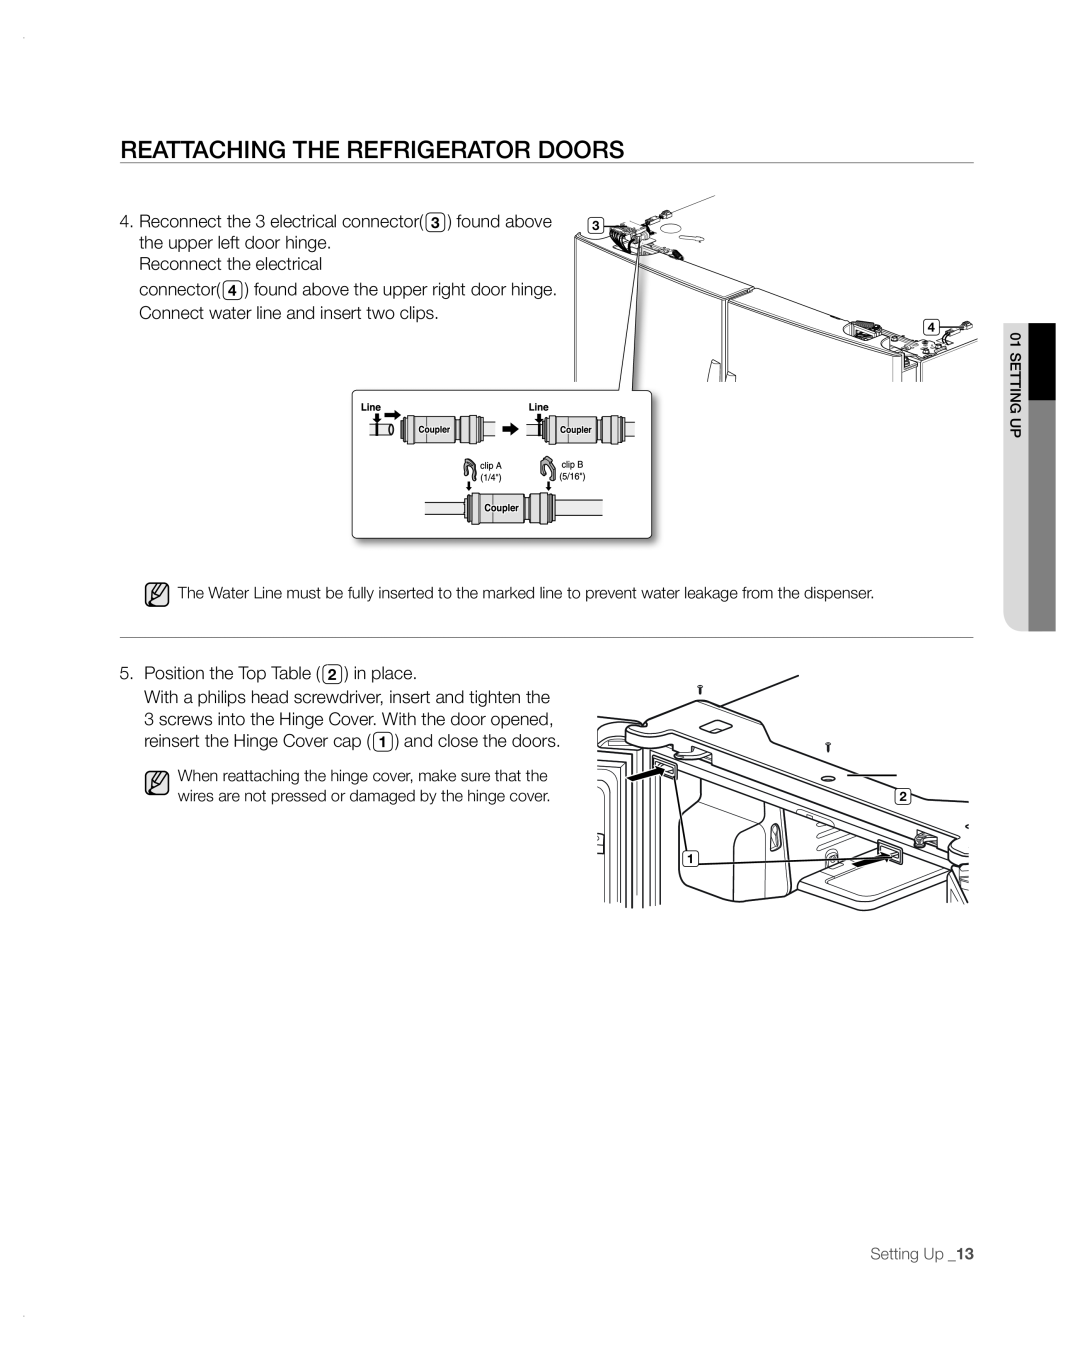 Samsung RFG297AA user manual REAttACHinG tHE REFRiGERAtoR DooRs, Position the Top in place 